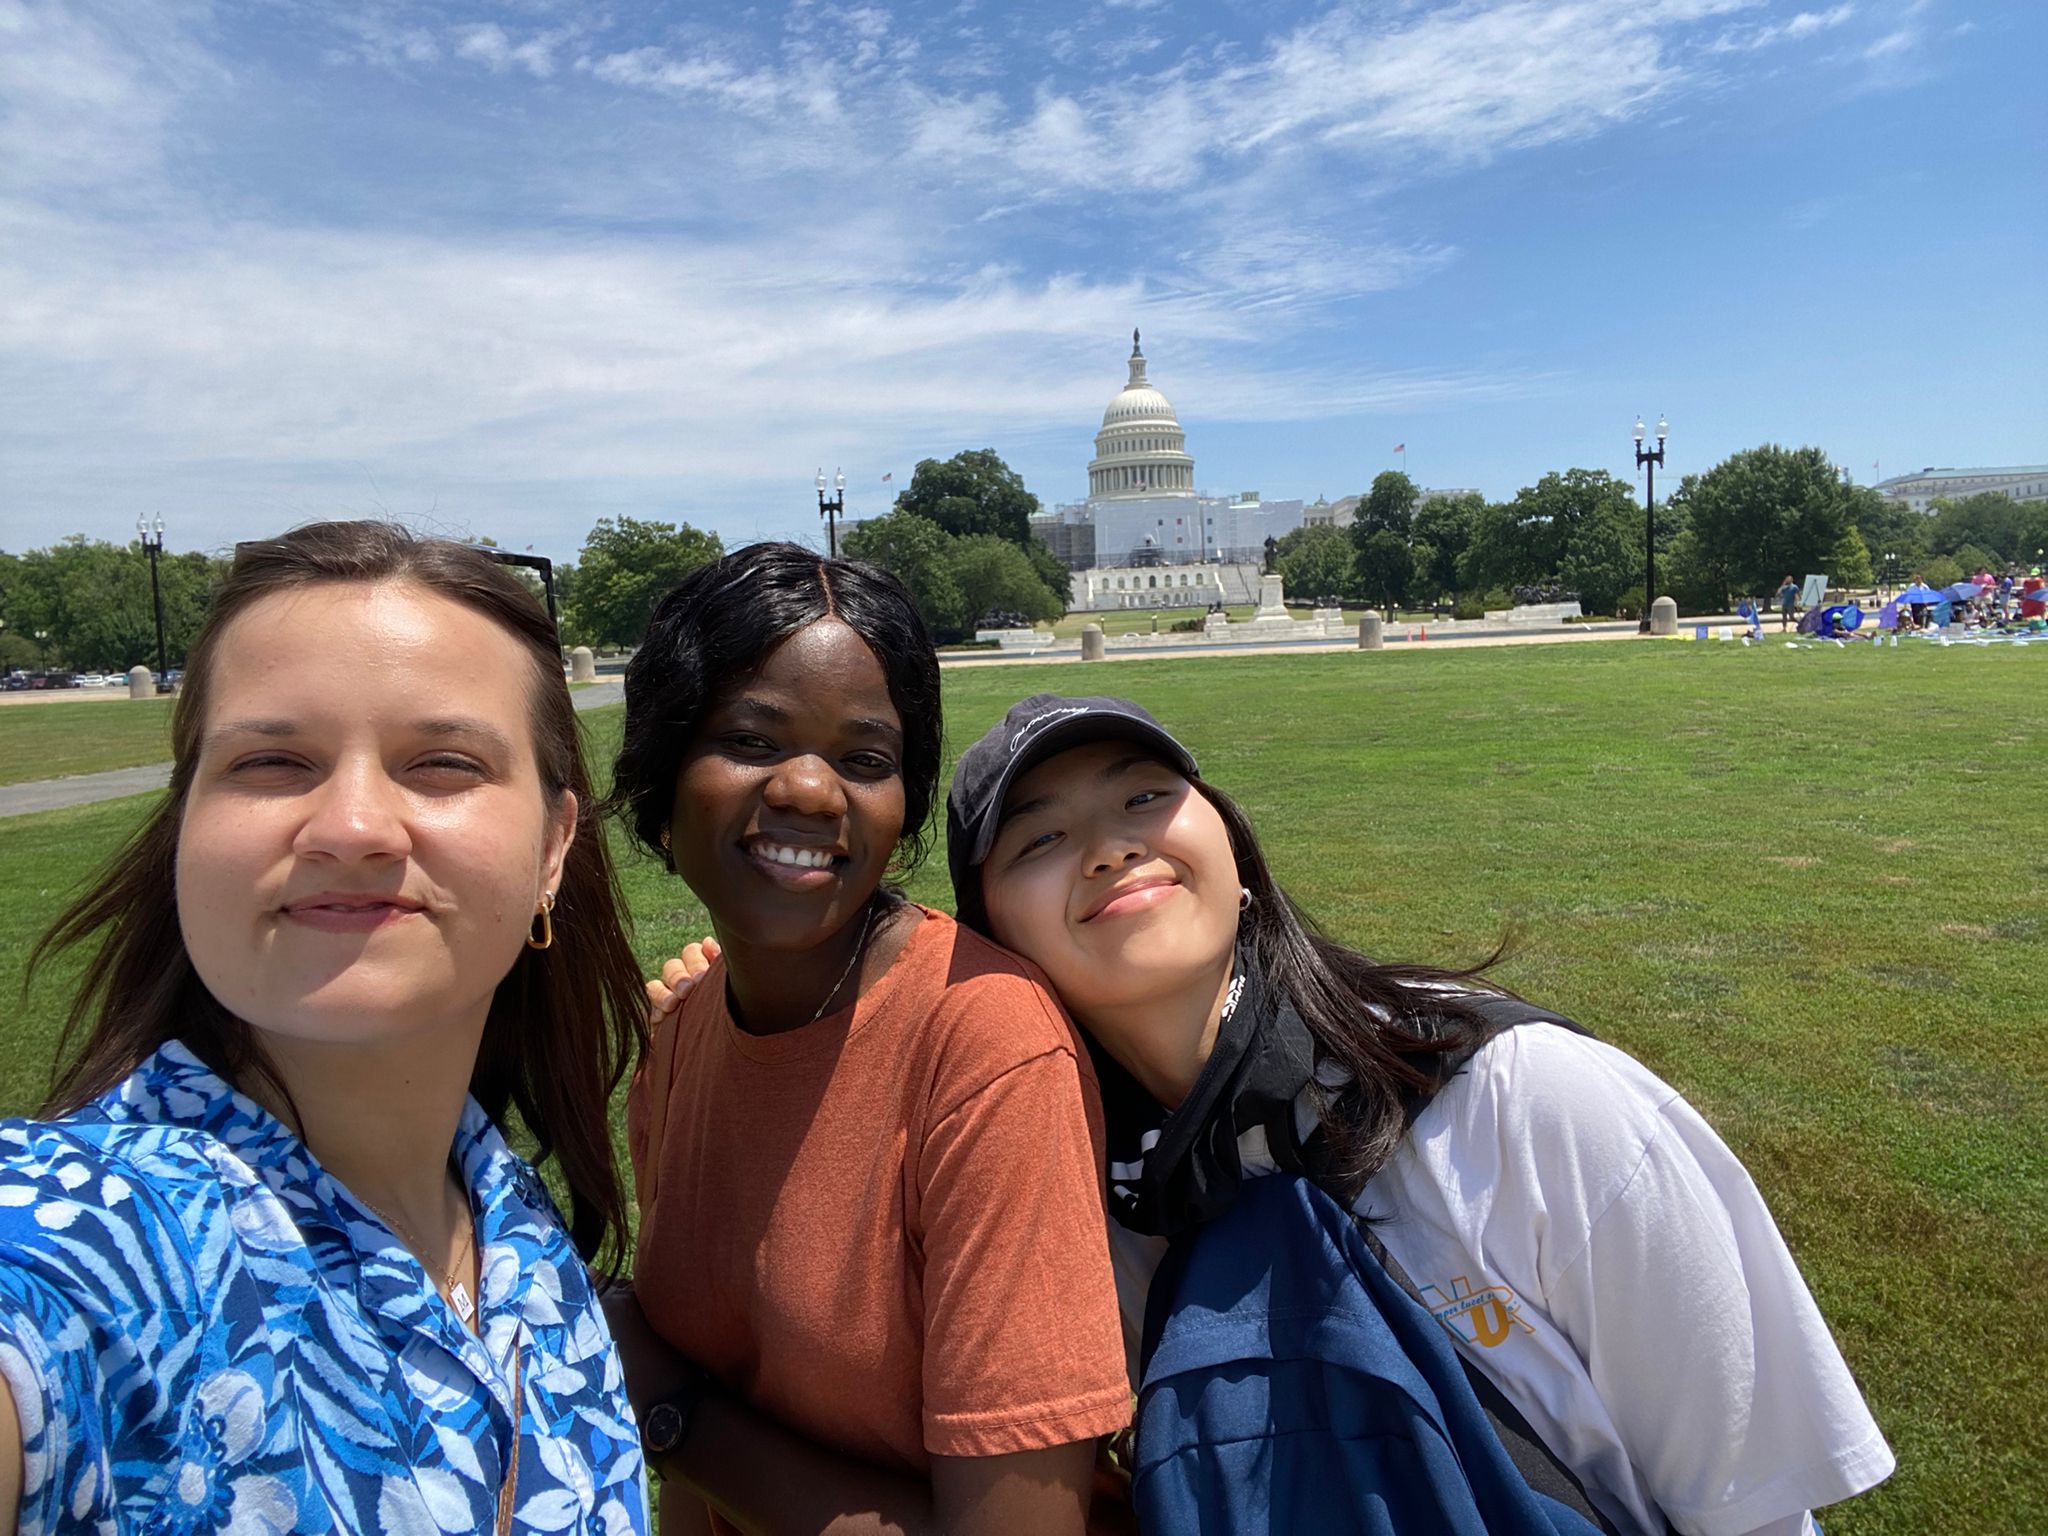 Three young women taking a selfie photo in front of the US Senate building